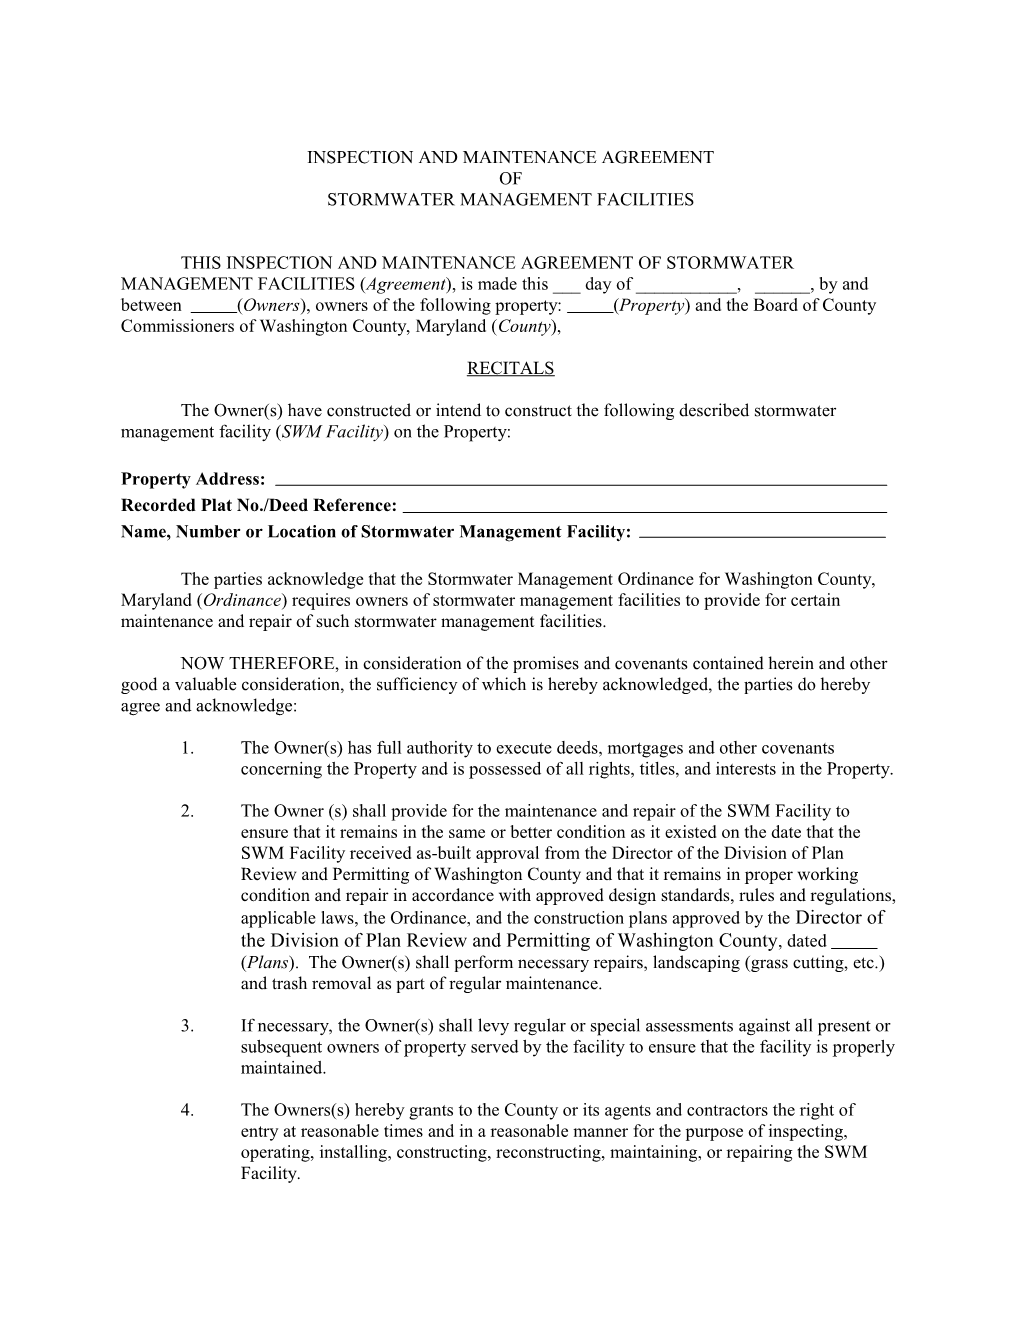 Inspection and Maintenance Agreement